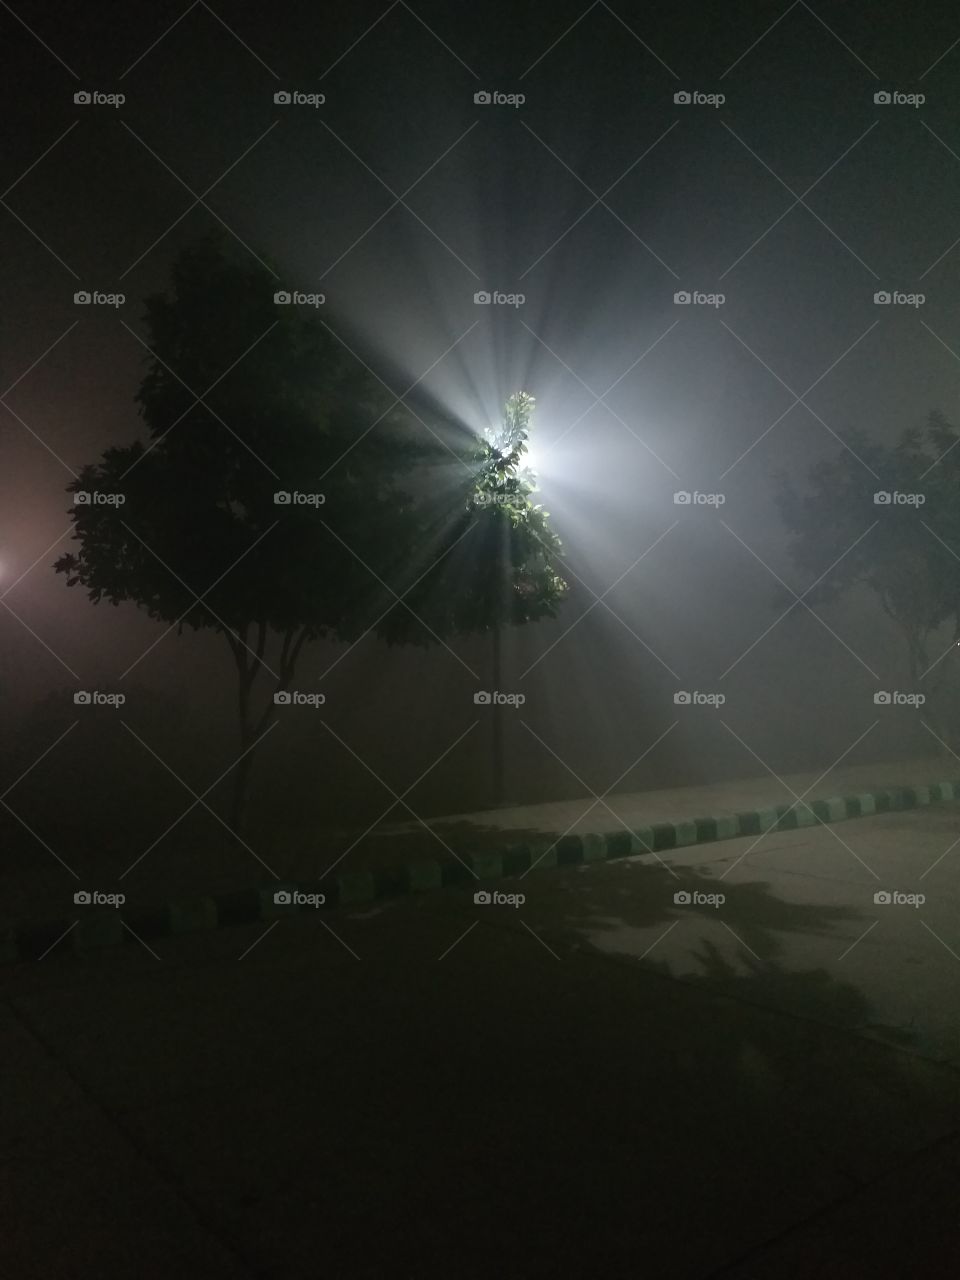 DURING FOGGY NIGHTS ........ A CLEAR VISIBLE VIEW OF FOG FROM THE LIGHT RAYS.......